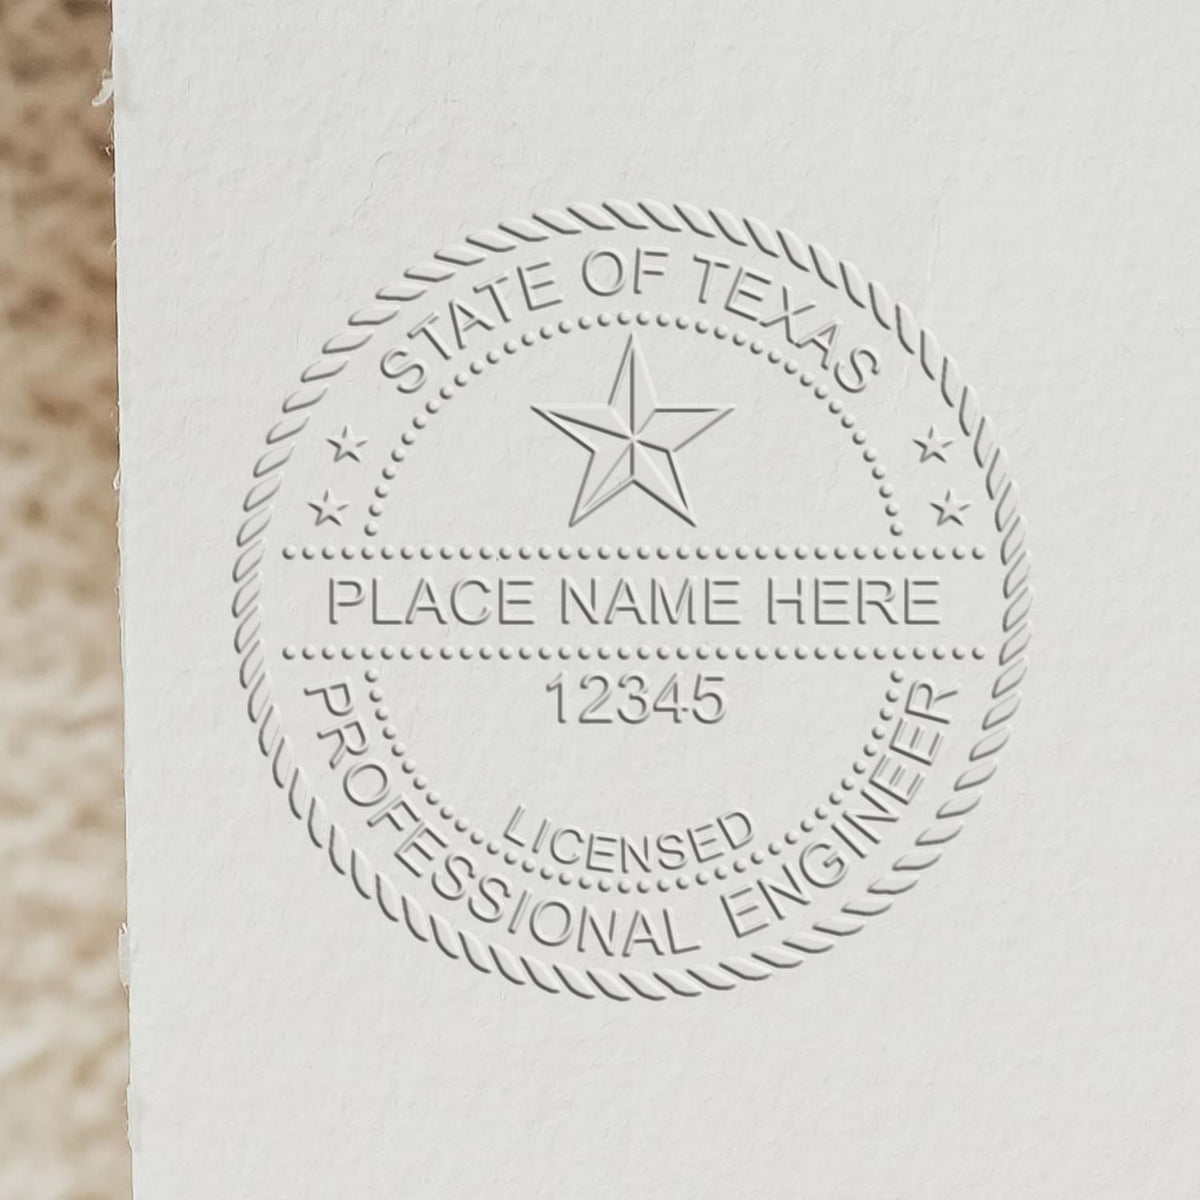 An alternative view of the Heavy Duty Cast Iron Texas Engineer Seal Embosser stamped on a sheet of paper showing the image in use